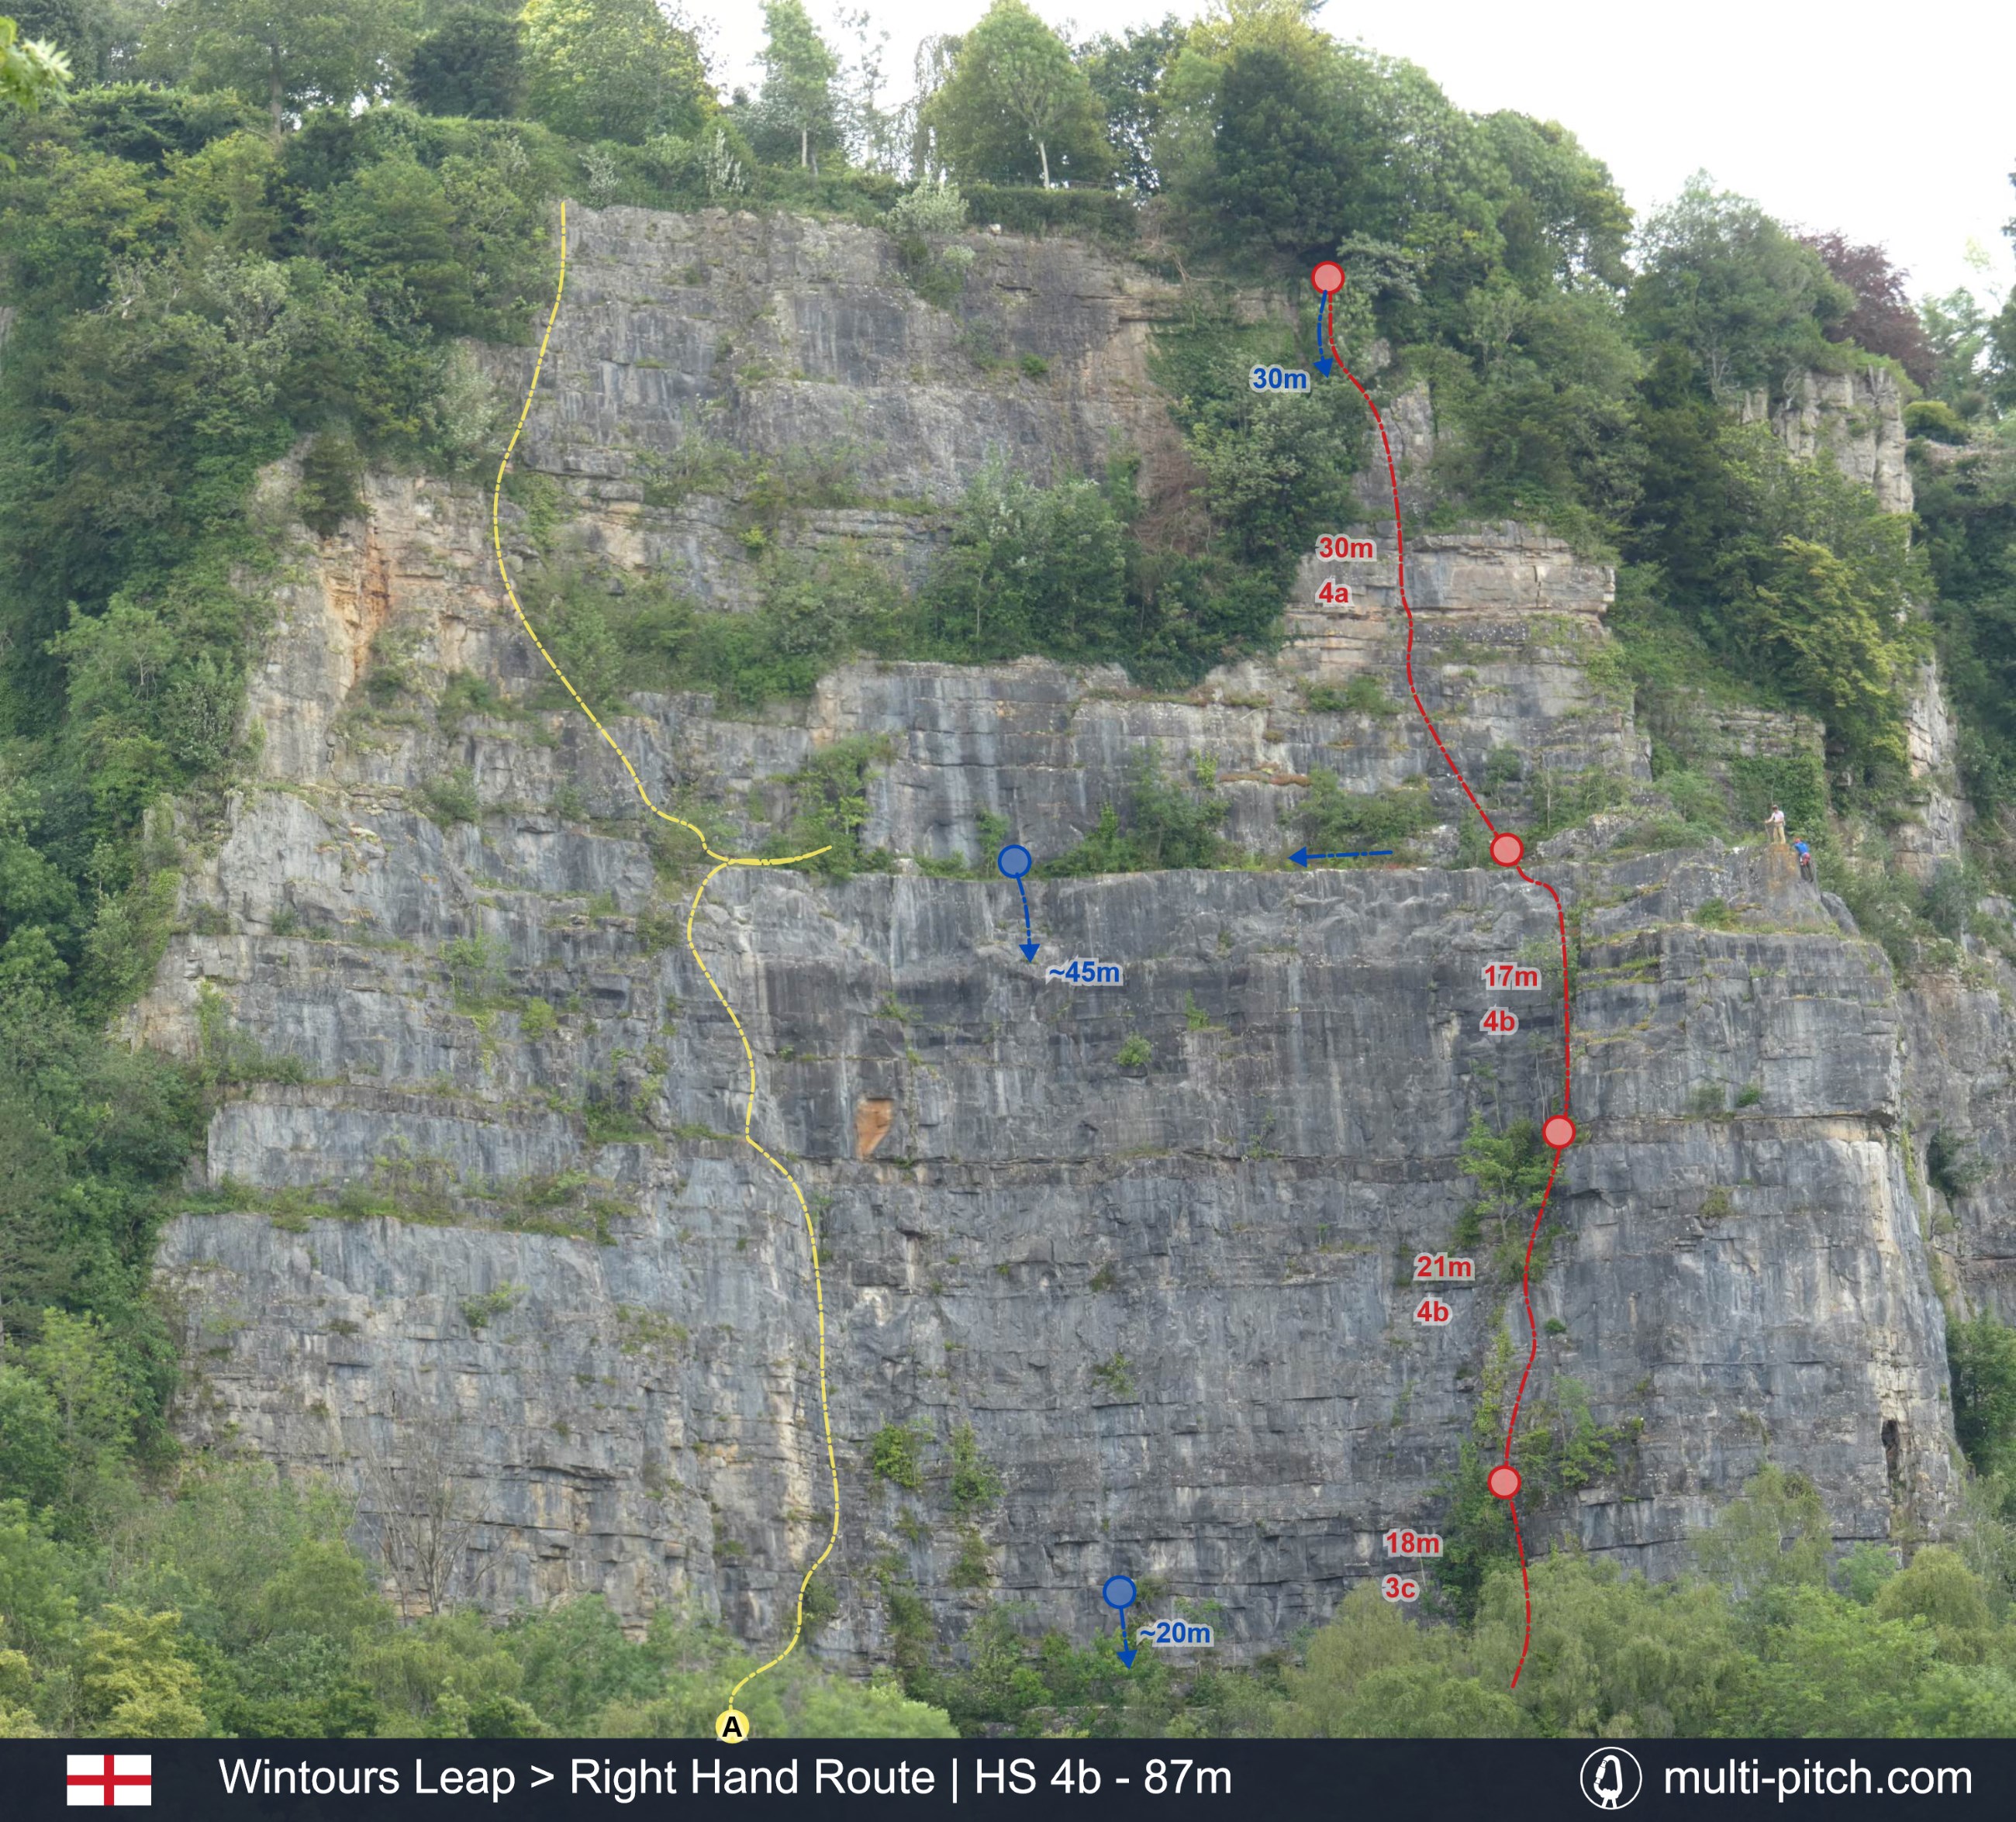 Right Hand Route Climb at Wintours Leap in the Wye Valley